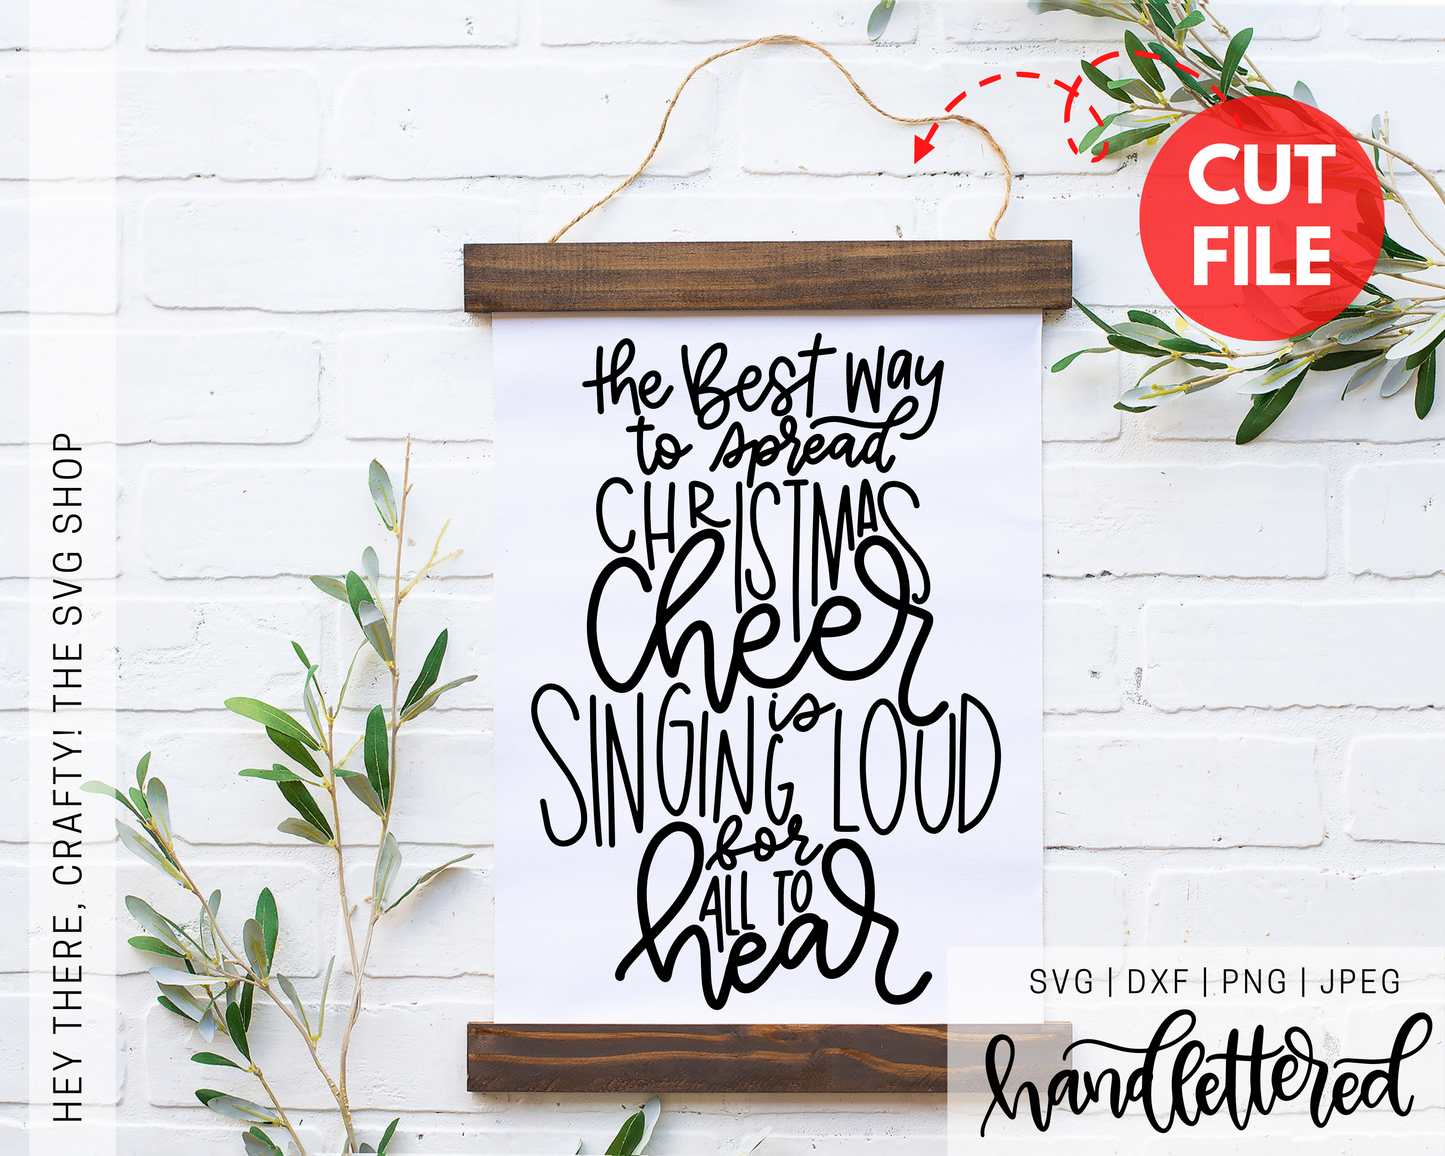 The Best Way to Spread Christmas Cheer | SVG, PNG, DXF, JPEG